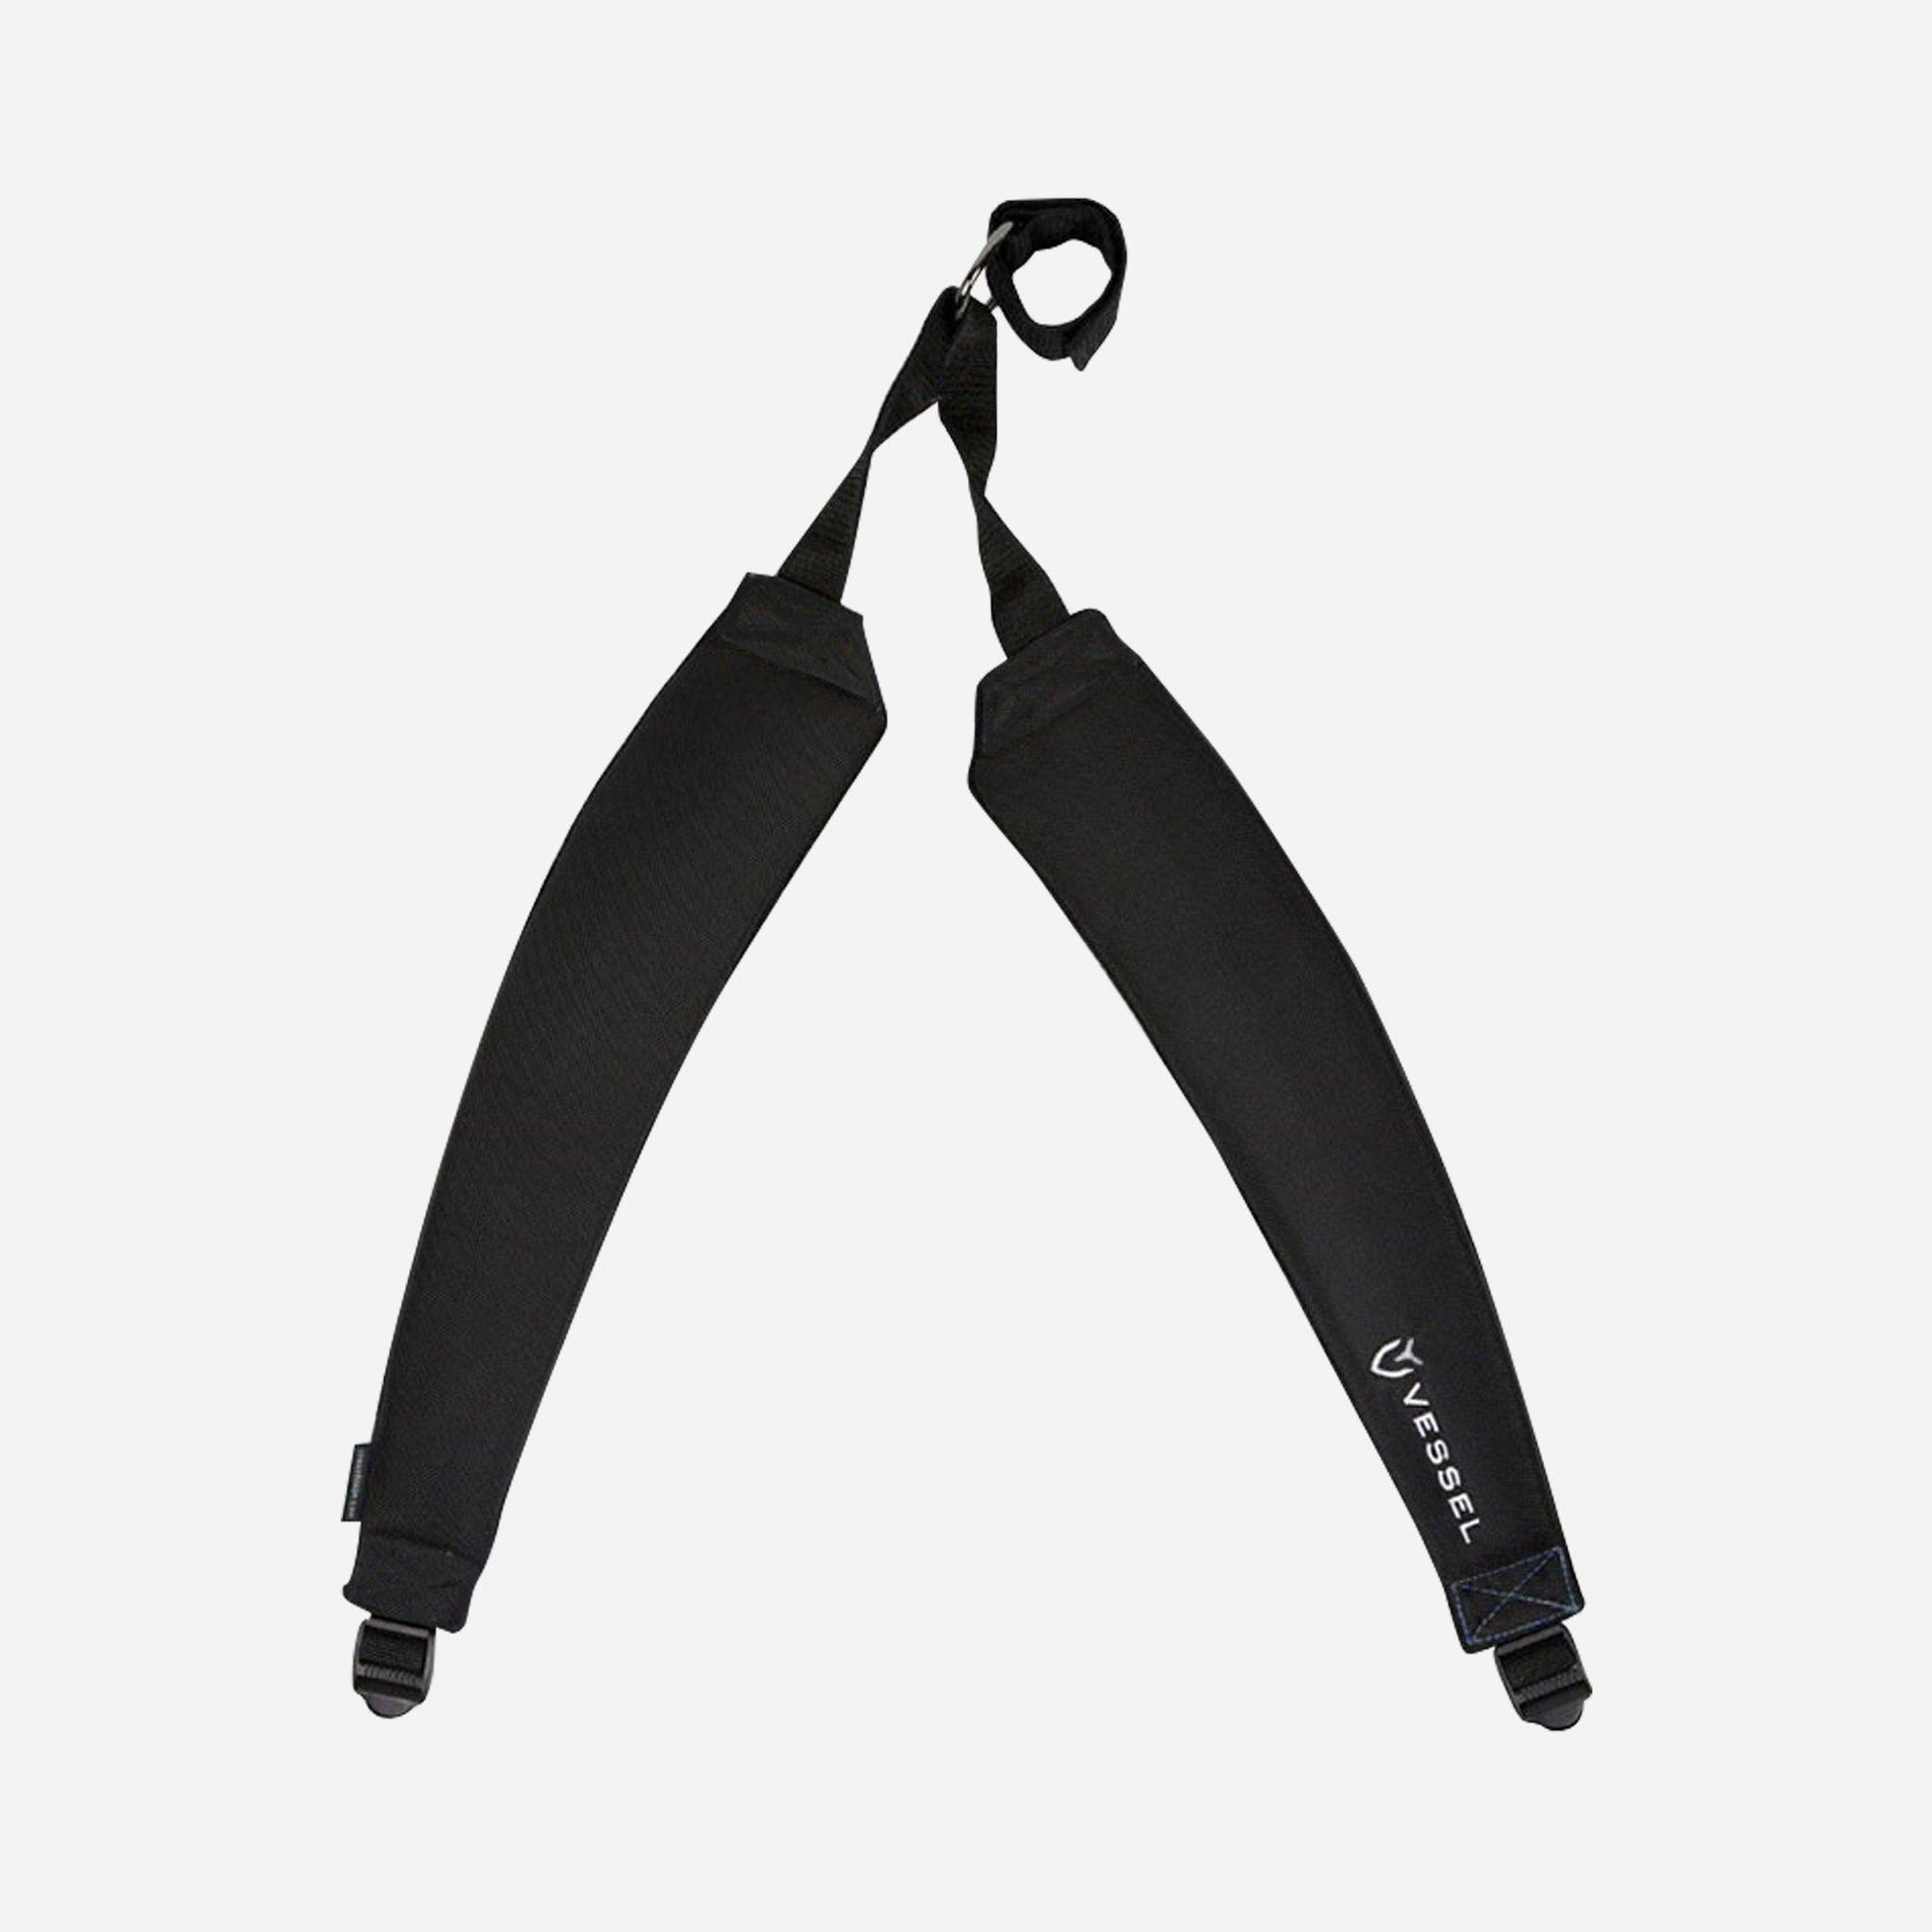 Staff Bag Double Strap